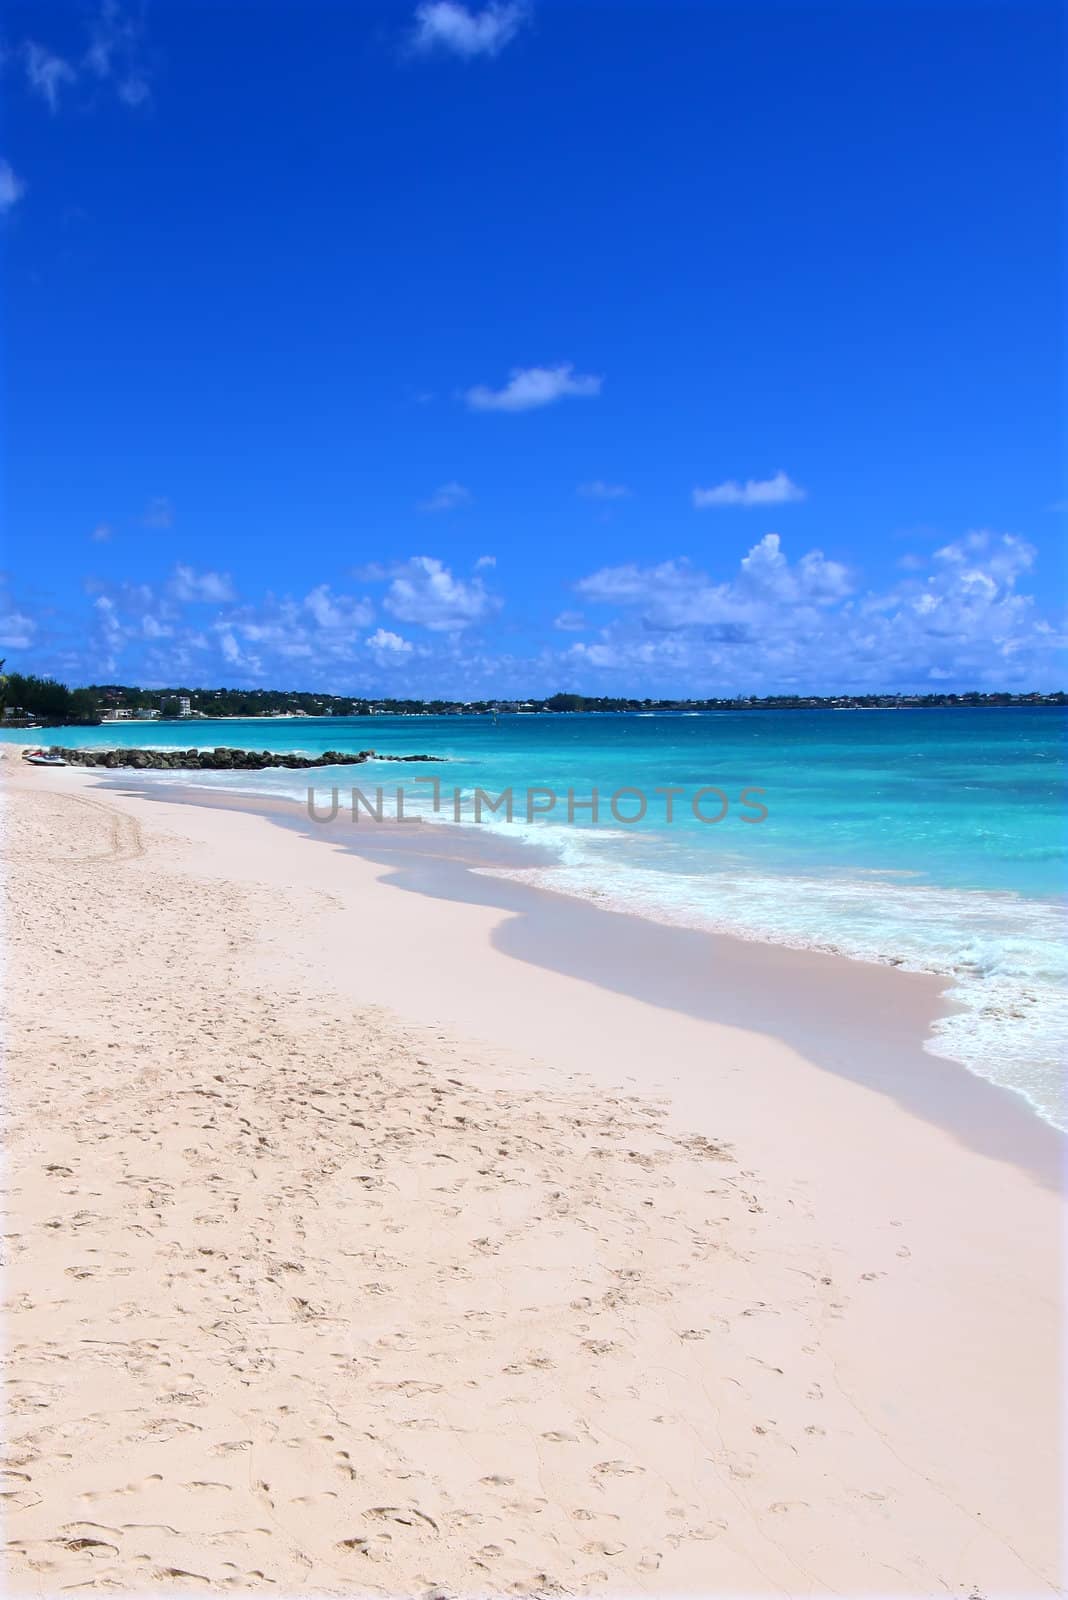 Beautiful Dover Beach on the Caribbean island of Barbados.